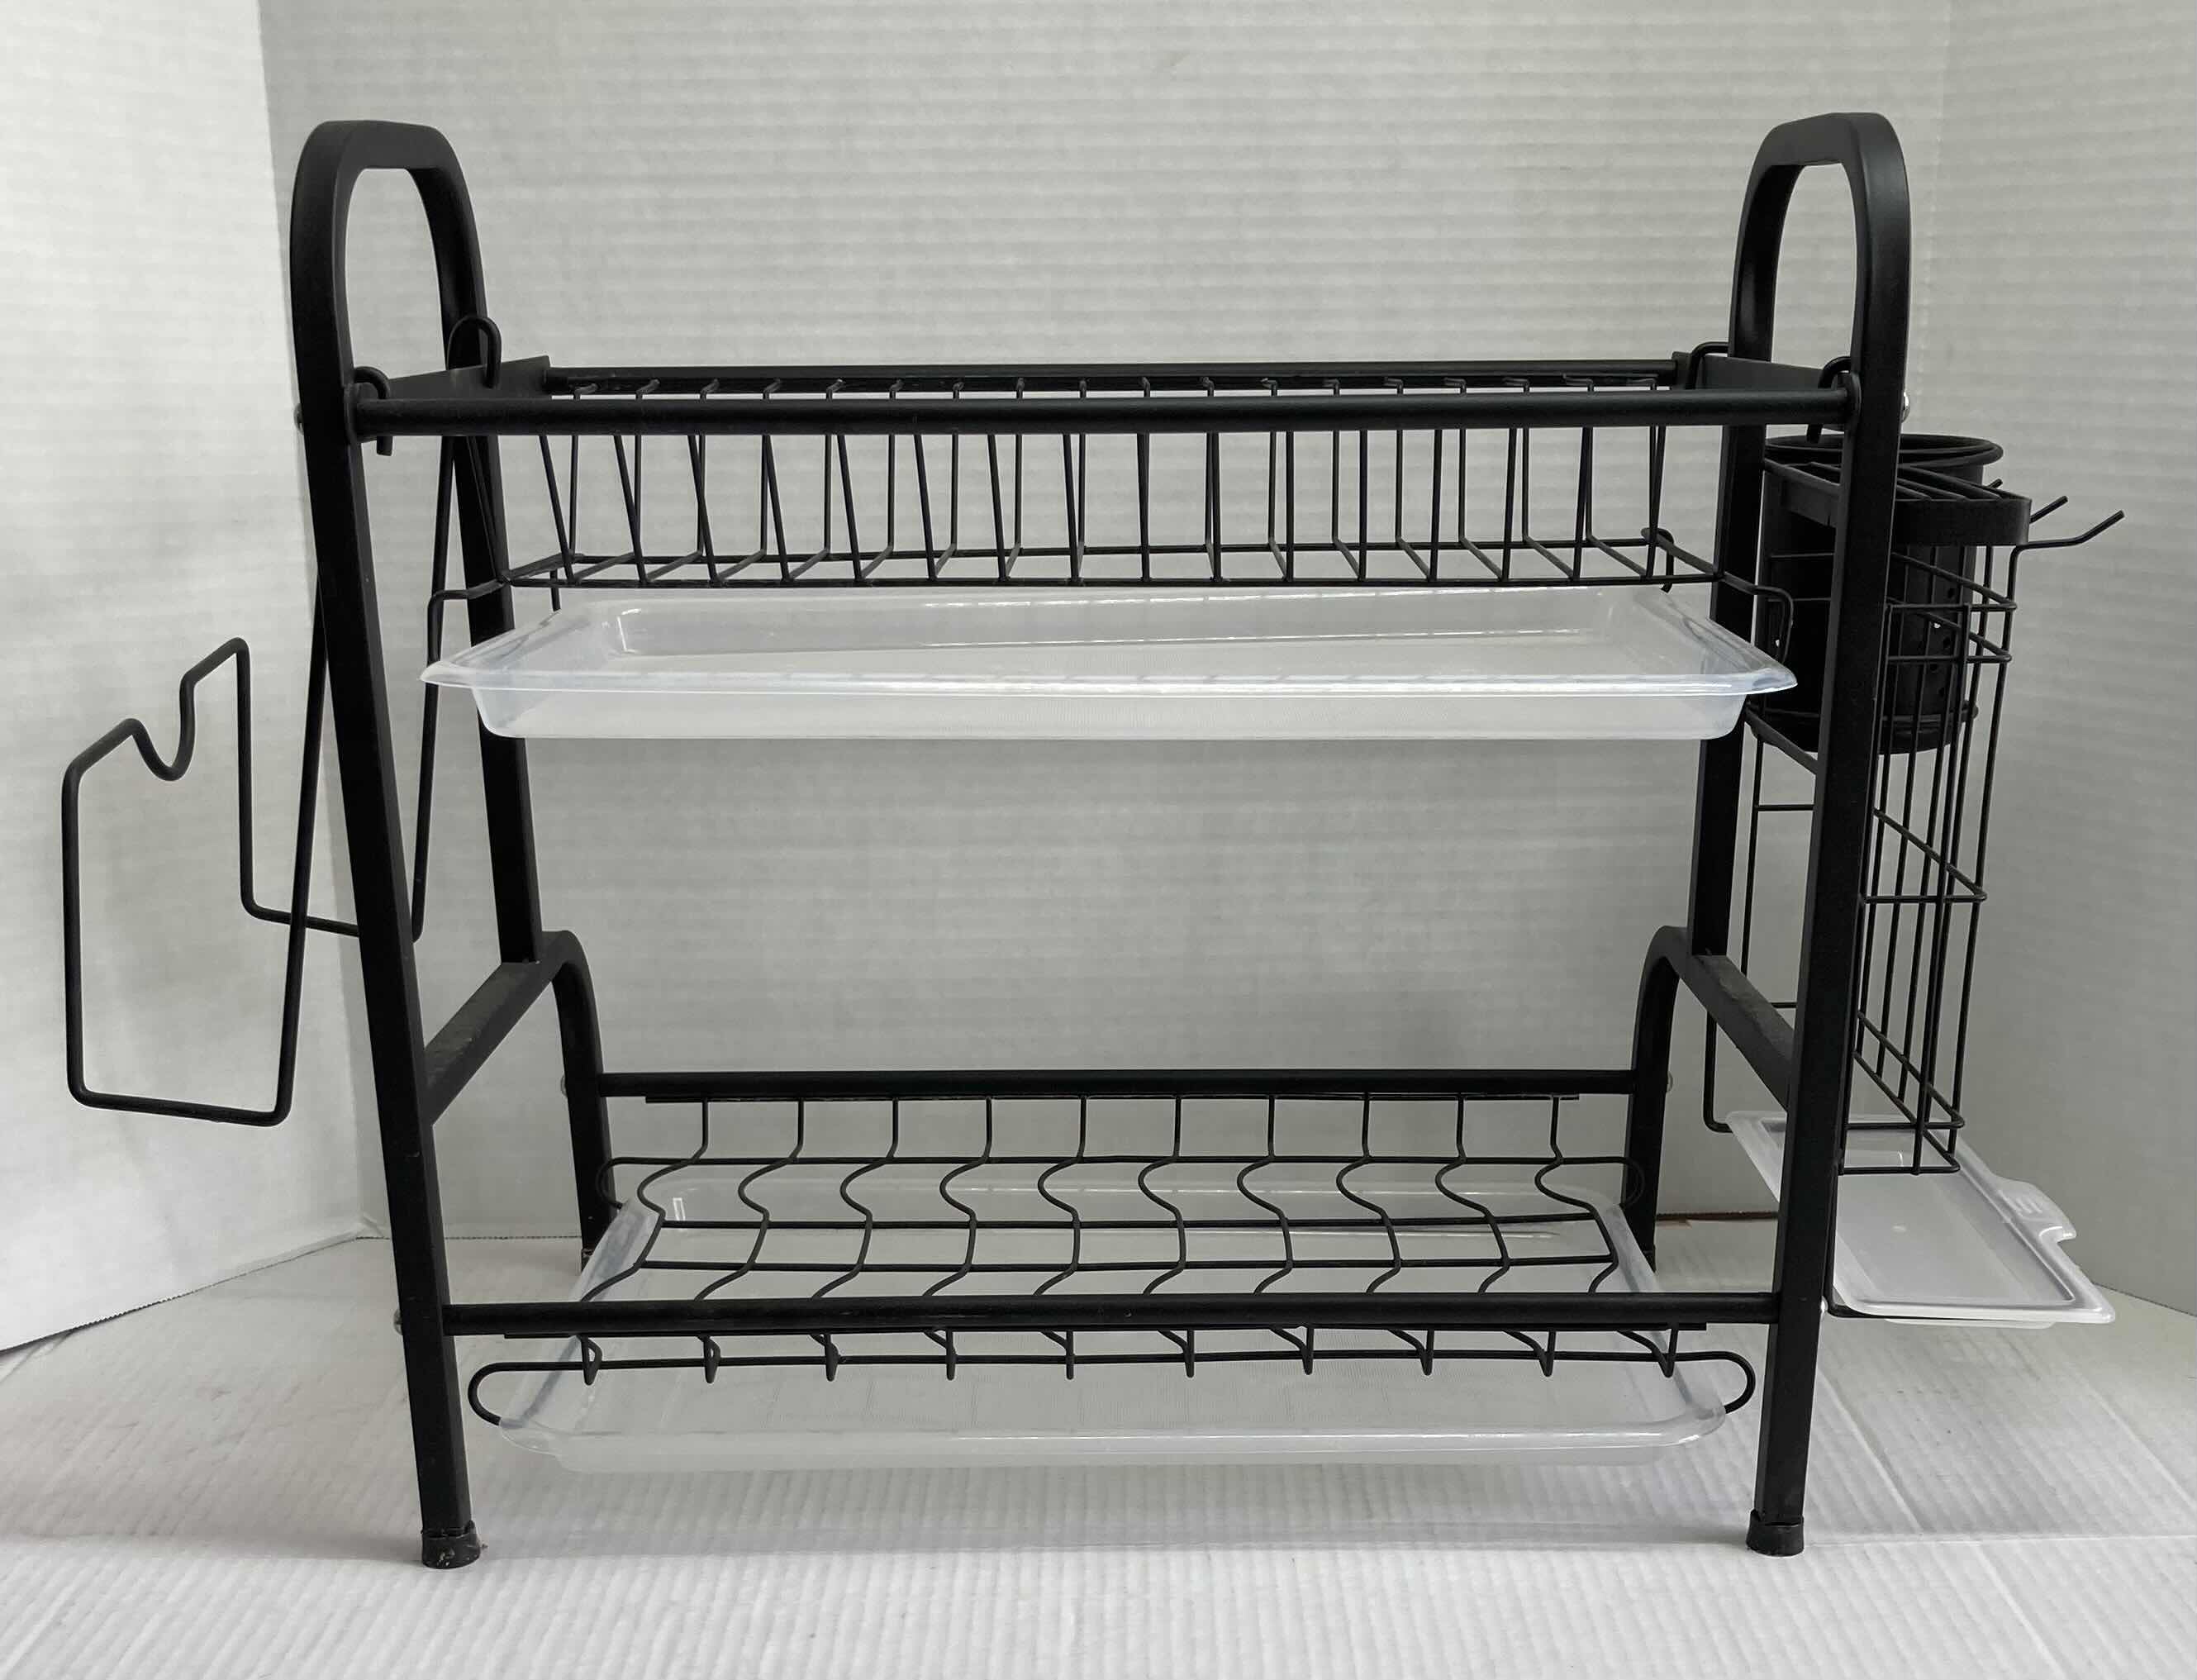 Photo 2 of KASSO STAINLESS STEEL 2 TIER DISH DRYING RACK 15.7” X 10.2” H16.1